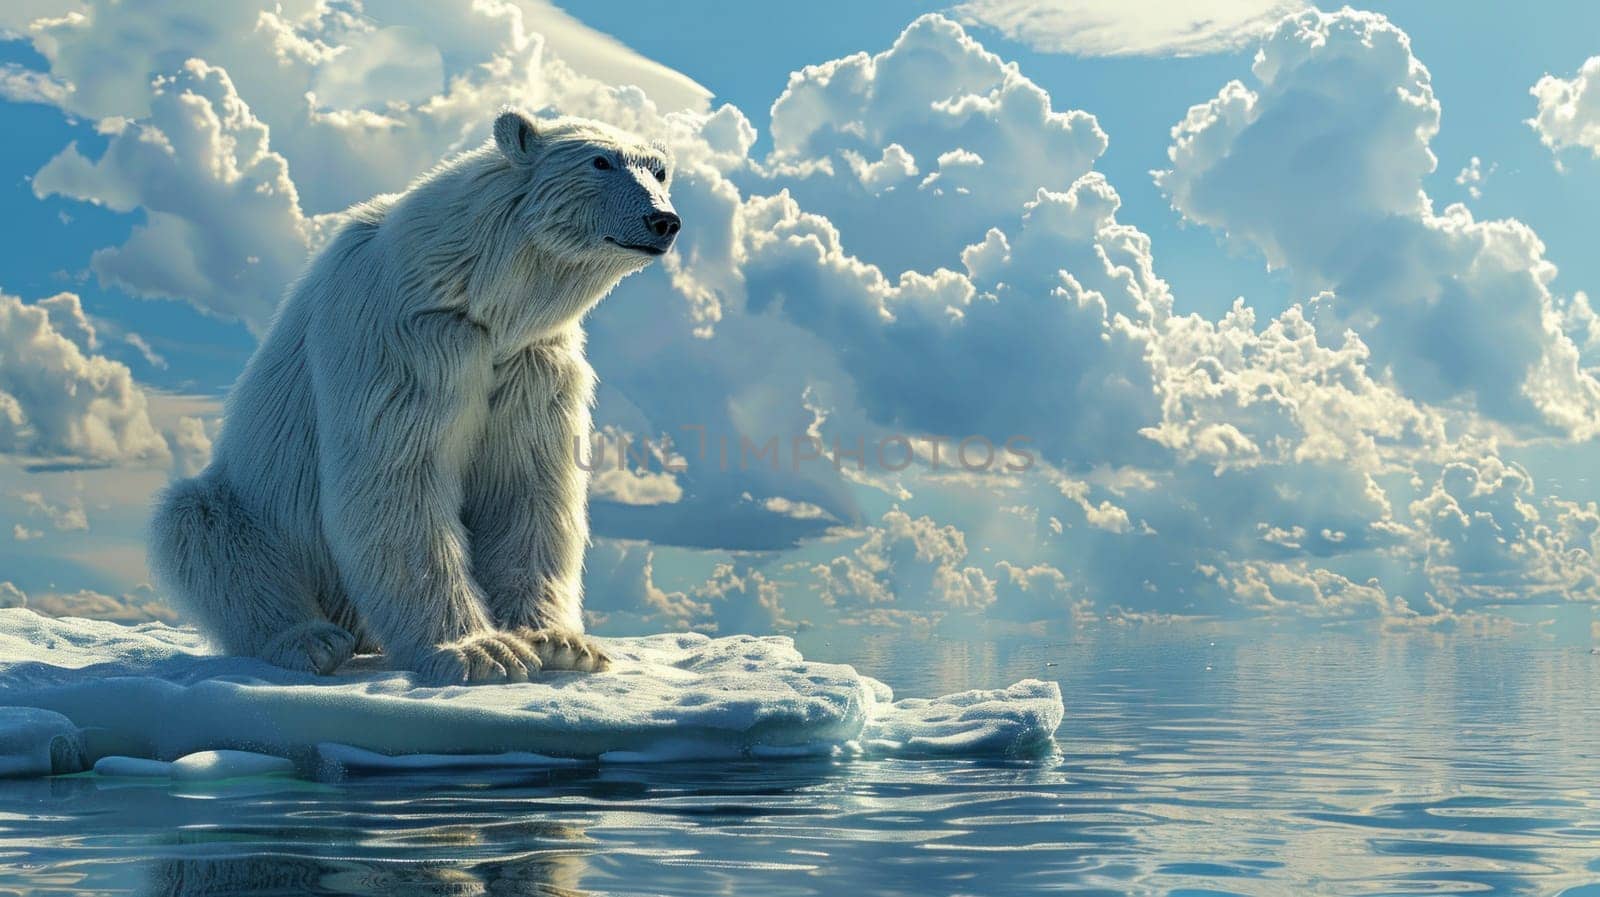 Polar bear sitting on ice floe in the middle of the ocean on arctic expedition journey